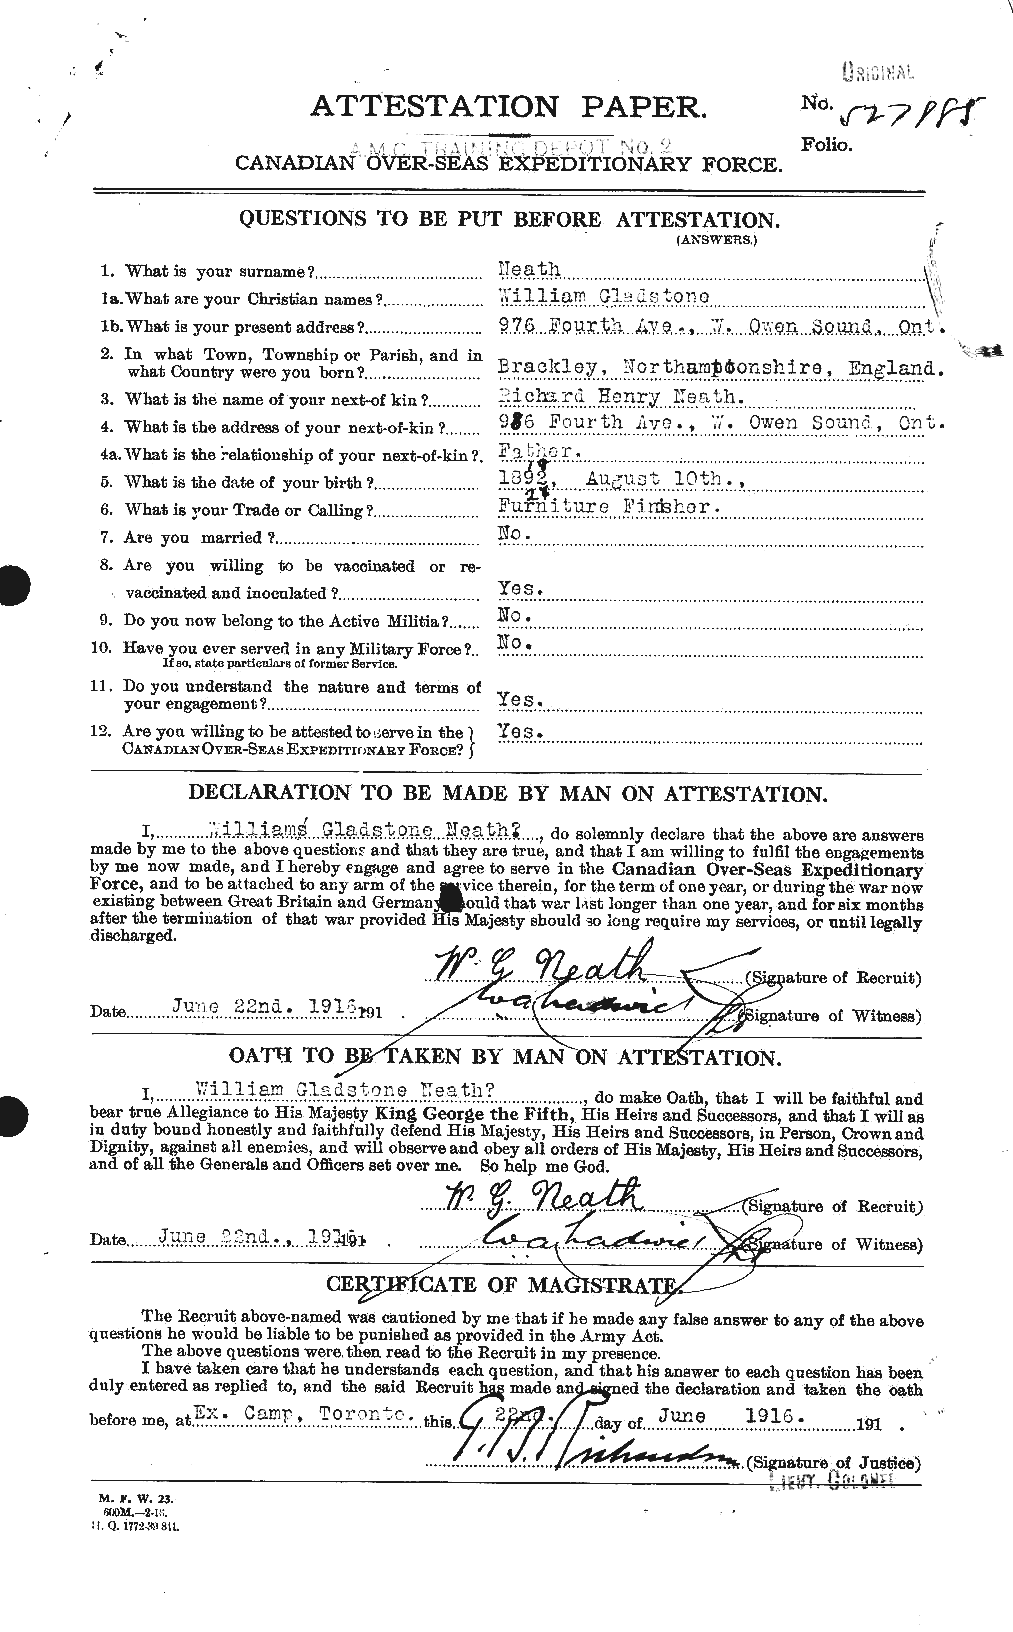 Personnel Records of the First World War - CEF 545074a